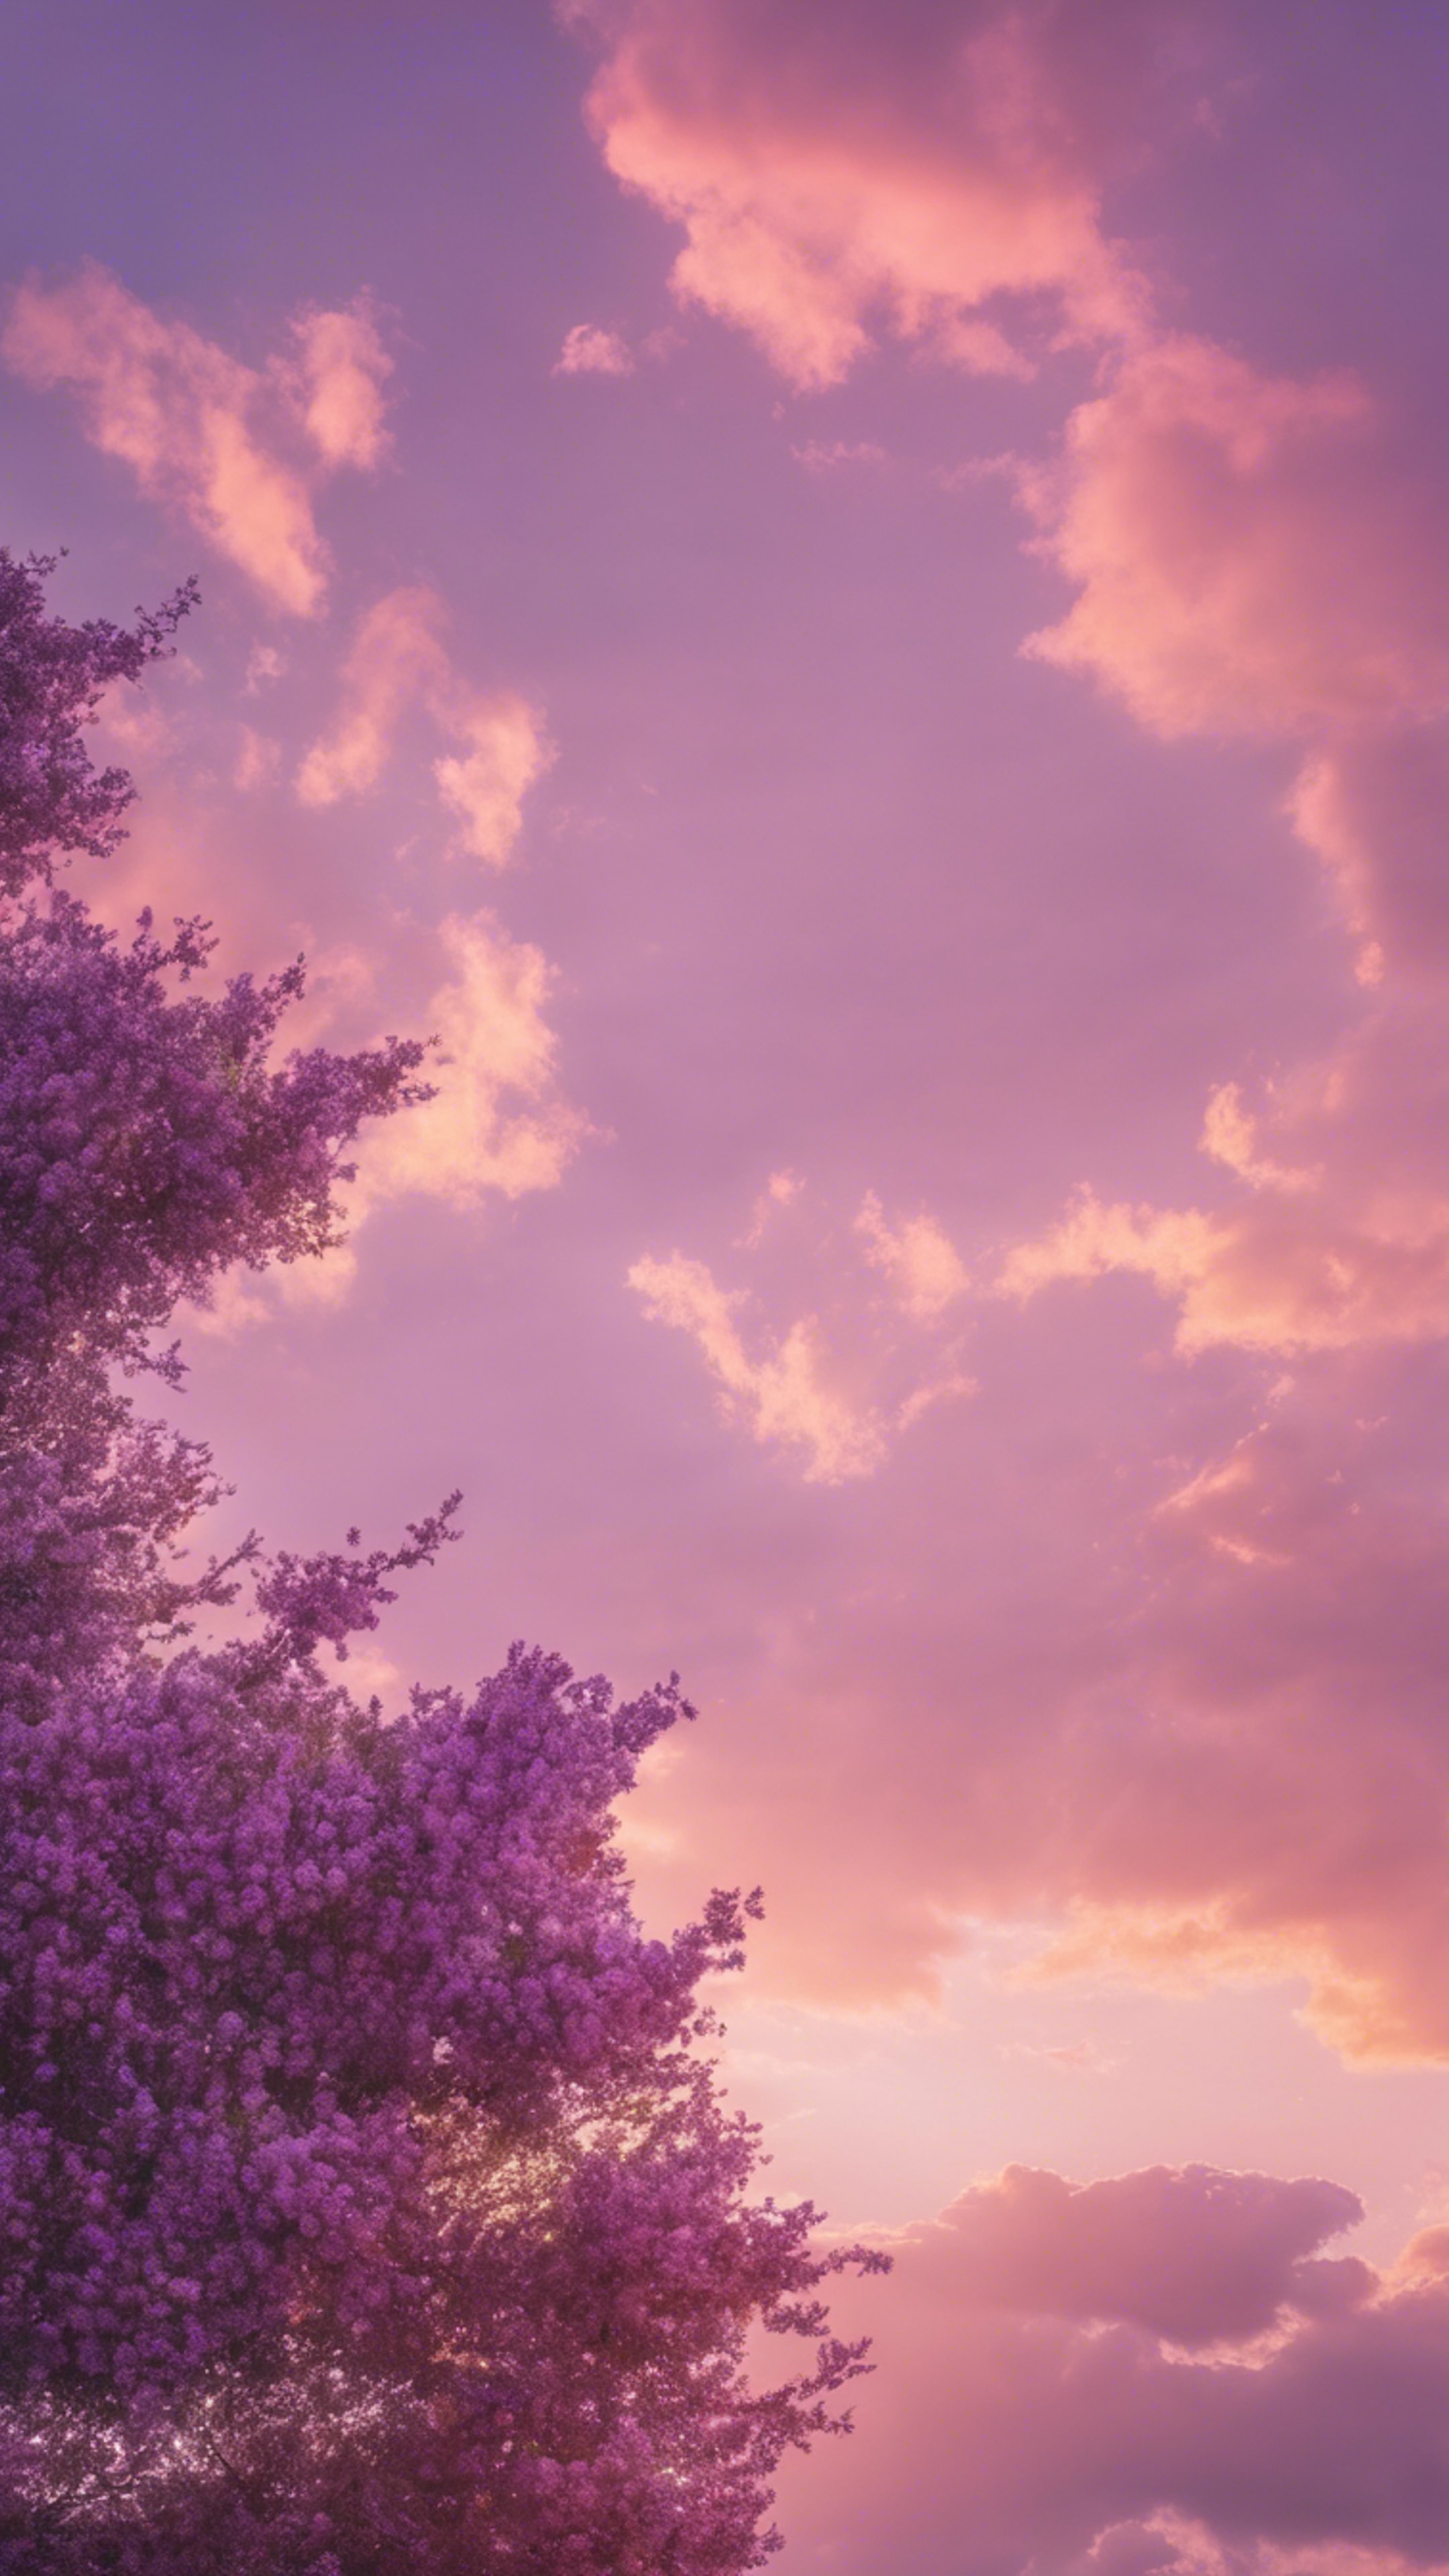 A serene sunset illuminating the sky with hues of light pink and lavender.壁紙[9e1e7b79399f45598a92]